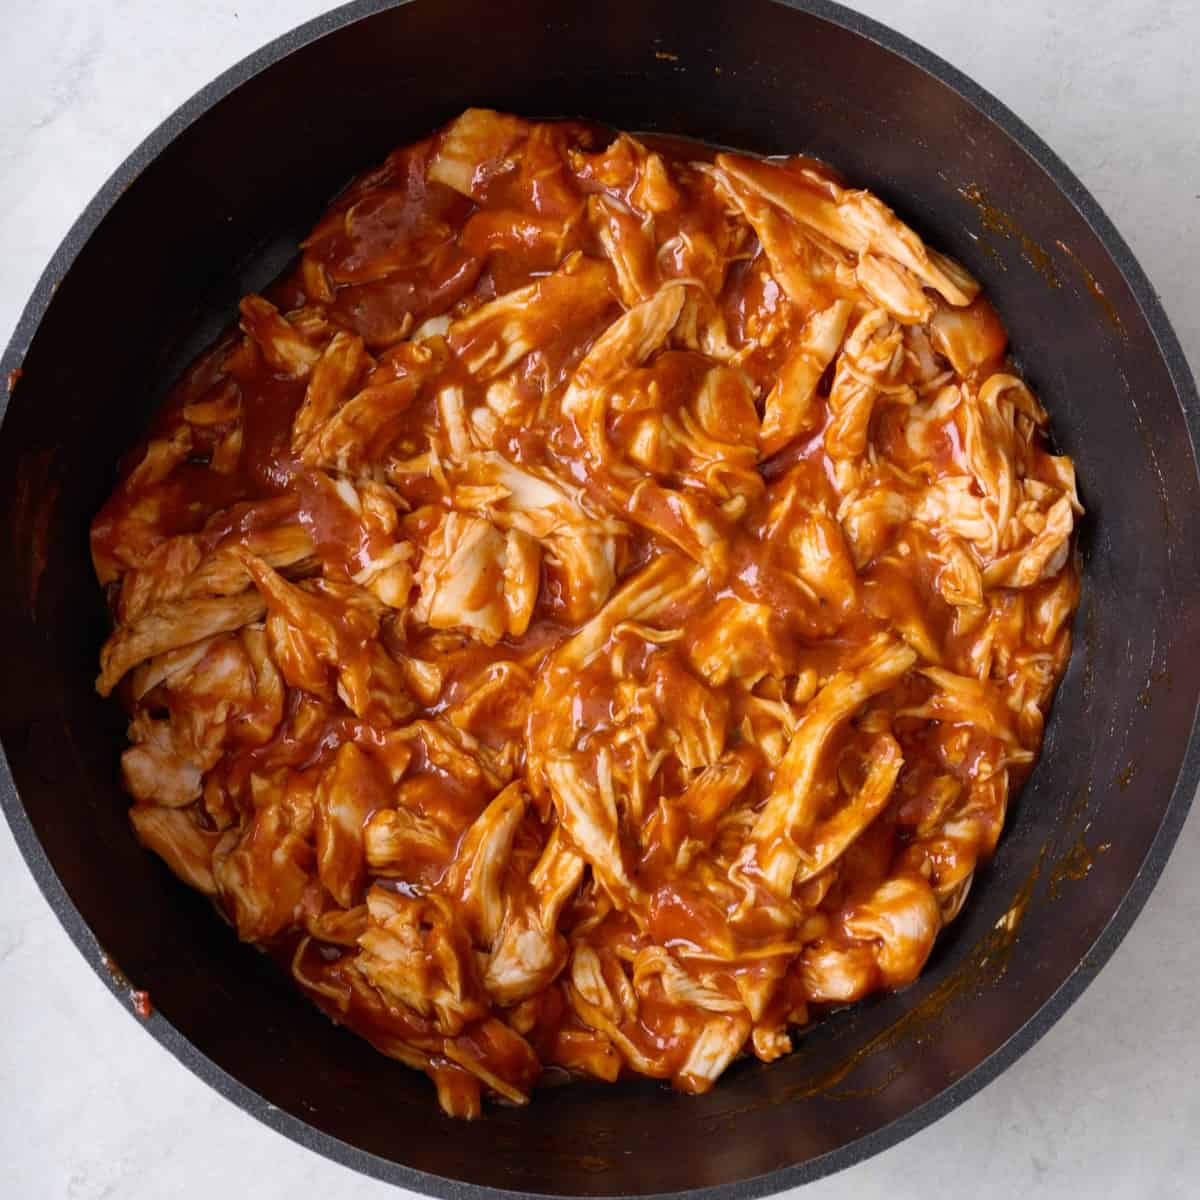 Shredded chicken and bbq sauce in a pot.